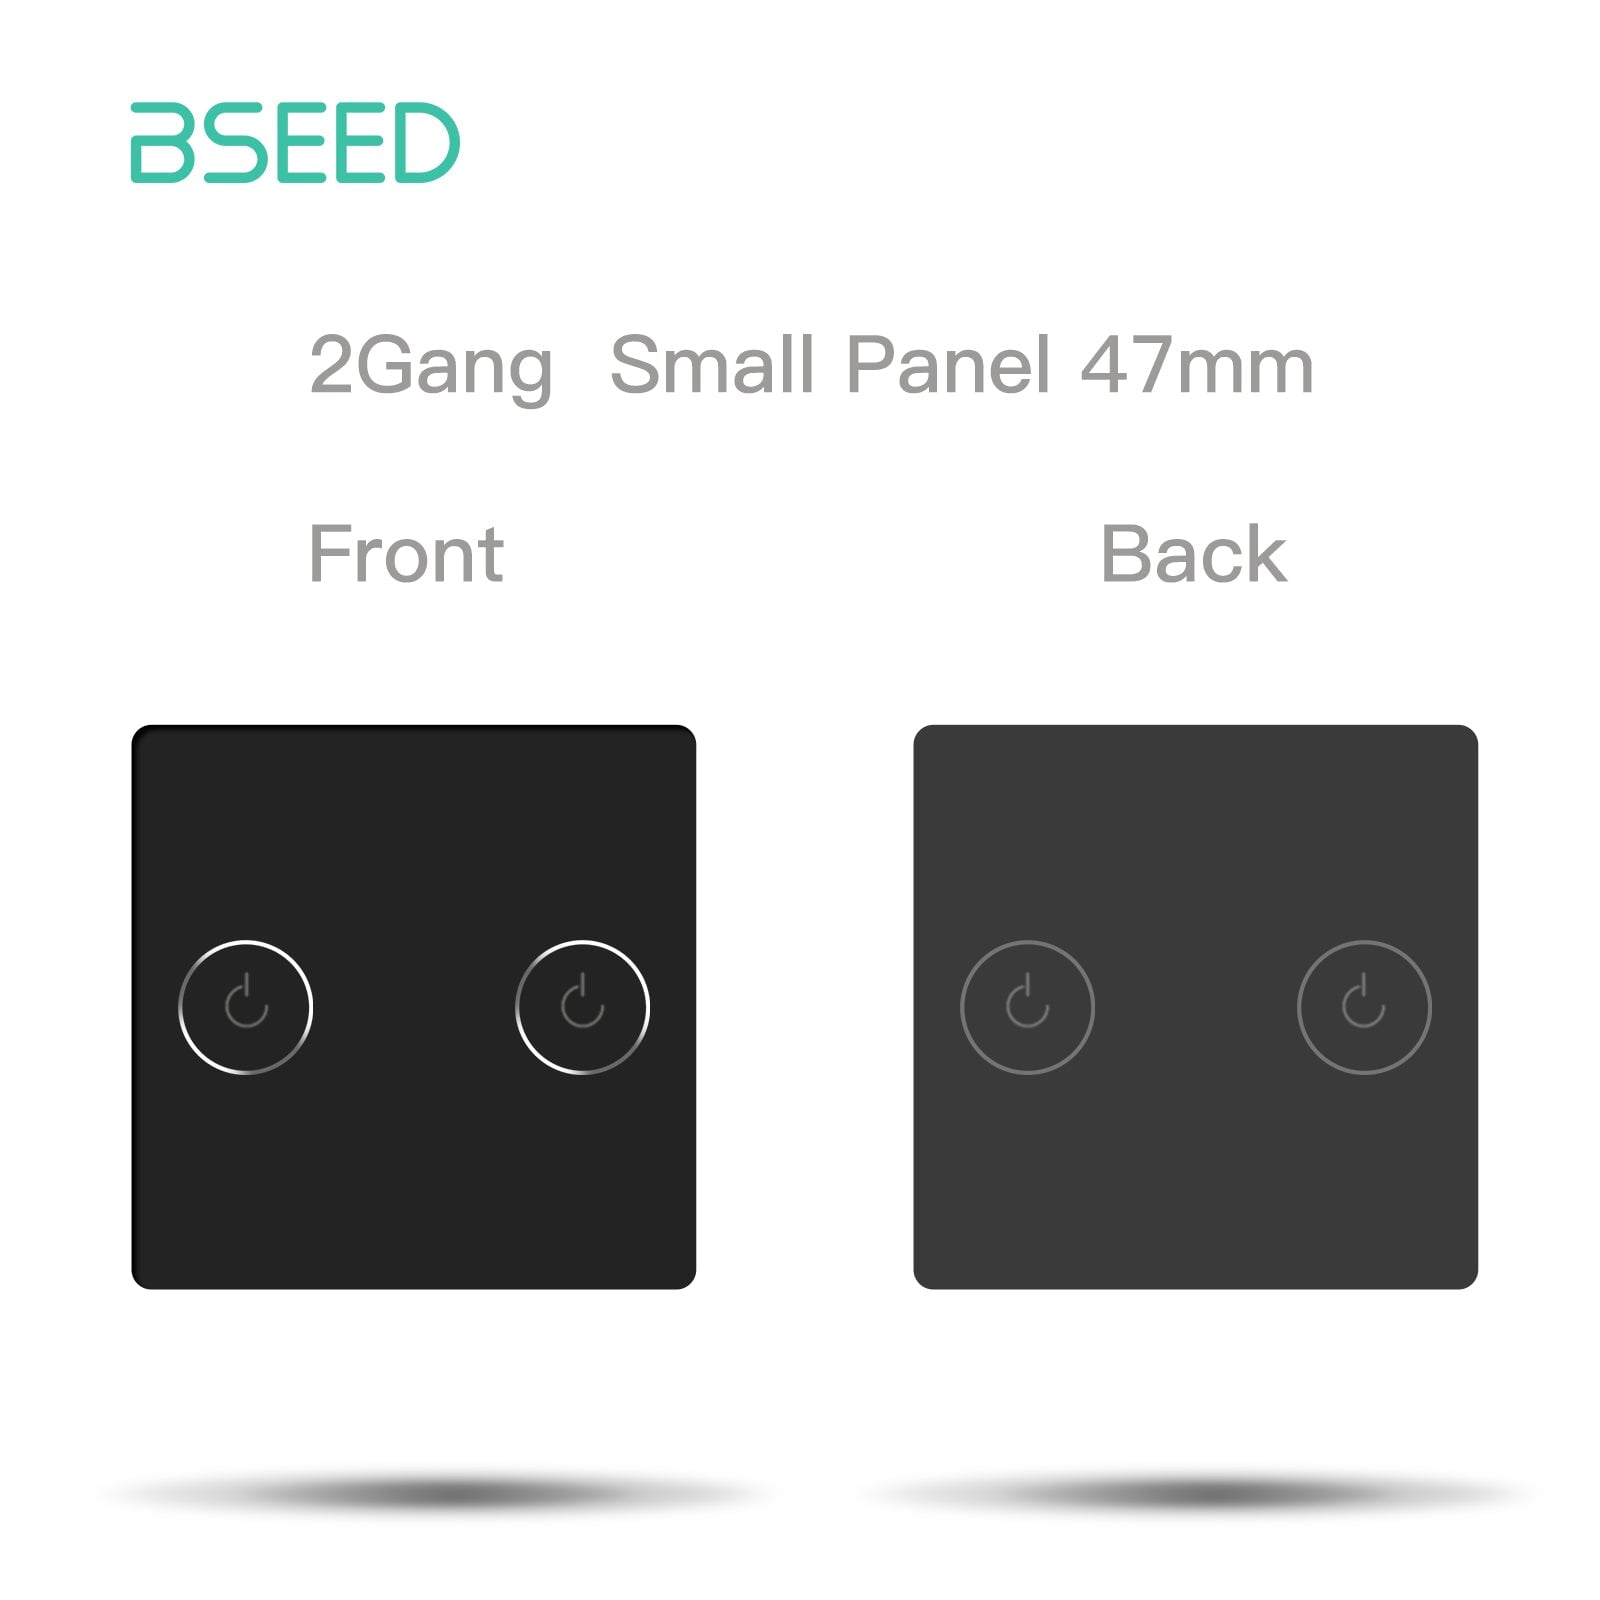 Bseed 47mm Glass Panel Switch DIY Part With Or Without Icon Bseedswitch Black Wifi 2Gang Switch icon Panel 